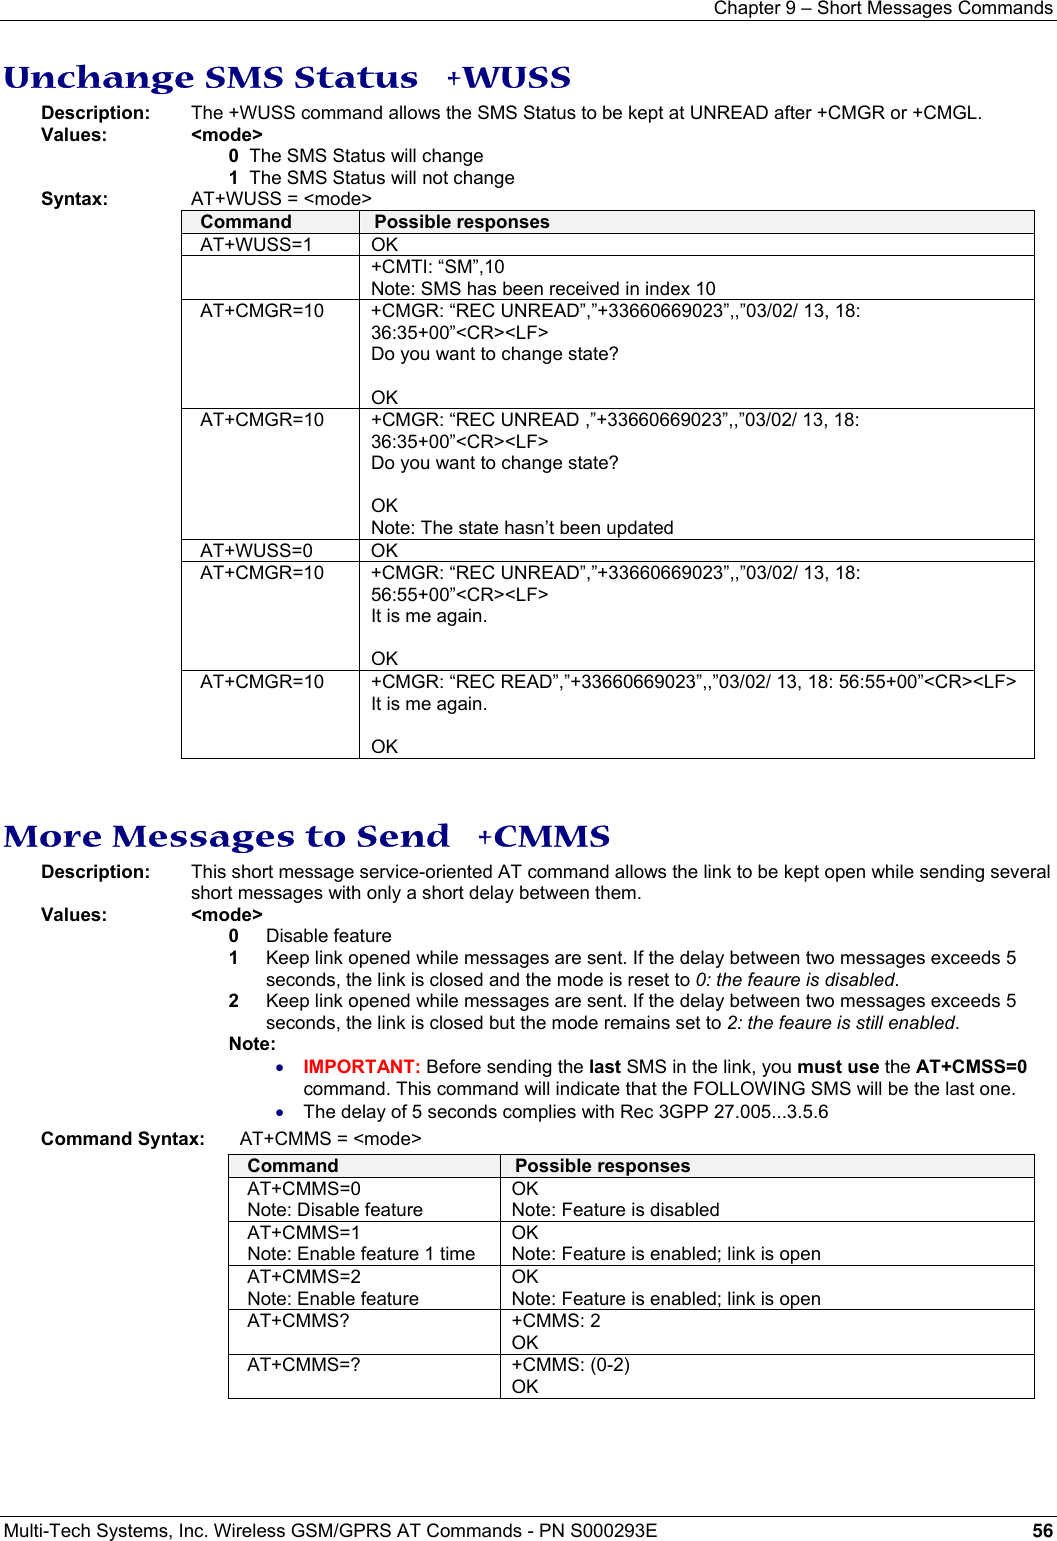 Chapter 9 – Short Messages Commands  Multi-Tech Systems, Inc. Wireless GSM/GPRS AT Commands - PN S000293E 56  Unchange SMS Status   +WUSS Description:  The +WUSS command allows the SMS Status to be kept at UNREAD after +CMGR or +CMGL. Values: &lt;mode&gt; 0  The SMS Status will change 1  The SMS Status will not change Syntax:    AT+WUSS = &lt;mode&gt; Command  Possible responses AT+WUSS=1 OK  +CMTI: “SM”,10 Note: SMS has been received in index 10 AT+CMGR=10  +CMGR: “REC UNREAD”,”+33660669023”,,”03/02/ 13, 18: 36:35+00”&lt;CR&gt;&lt;LF&gt; Do you want to change state?  OK AT+CMGR=10   +CMGR: “REC UNREAD ,”+33660669023”,,”03/02/ 13, 18: 36:35+00”&lt;CR&gt;&lt;LF&gt; Do you want to change state?  OK Note: The state hasn’t been updated AT+WUSS=0 OK AT+CMGR=10  +CMGR: “REC UNREAD”,”+33660669023”,,”03/02/ 13, 18: 56:55+00”&lt;CR&gt;&lt;LF&gt; It is me again.  OK AT+CMGR=10  +CMGR: “REC READ”,”+33660669023”,,”03/02/ 13, 18: 56:55+00”&lt;CR&gt;&lt;LF&gt; It is me again.  OK   More Messages to Send   +CMMS Description:   This short message service-oriented AT command allows the link to be kept open while sending several short messages with only a short delay between them. Values: &lt;mode&gt; 0  Disable feature 1  Keep link opened while messages are sent. If the delay between two messages exceeds 5 seconds, the link is closed and the mode is reset to 0: the feaure is disabled. 2  Keep link opened while messages are sent. If the delay between two messages exceeds 5 seconds, the link is closed but the mode remains set to 2: the feaure is still enabled. Note: • IMPORTANT: Before sending the last SMS in the link, you must use the AT+CMSS=0 command. This command will indicate that the FOLLOWING SMS will be the last one. • The delay of 5 seconds complies with Rec 3GPP 27.005...3.5.6 Command Syntax:  AT+CMMS = &lt;mode&gt; Command  Possible responses AT+CMMS=0 Note: Disable feature OK Note: Feature is disabled AT+CMMS=1 Note: Enable feature 1 time OK Note: Feature is enabled; link is open AT+CMMS=2 Note: Enable feature OK Note: Feature is enabled; link is open AT+CMMS? +CMMS: 2 OK AT+CMMS=? +CMMS: (0-2) OK  